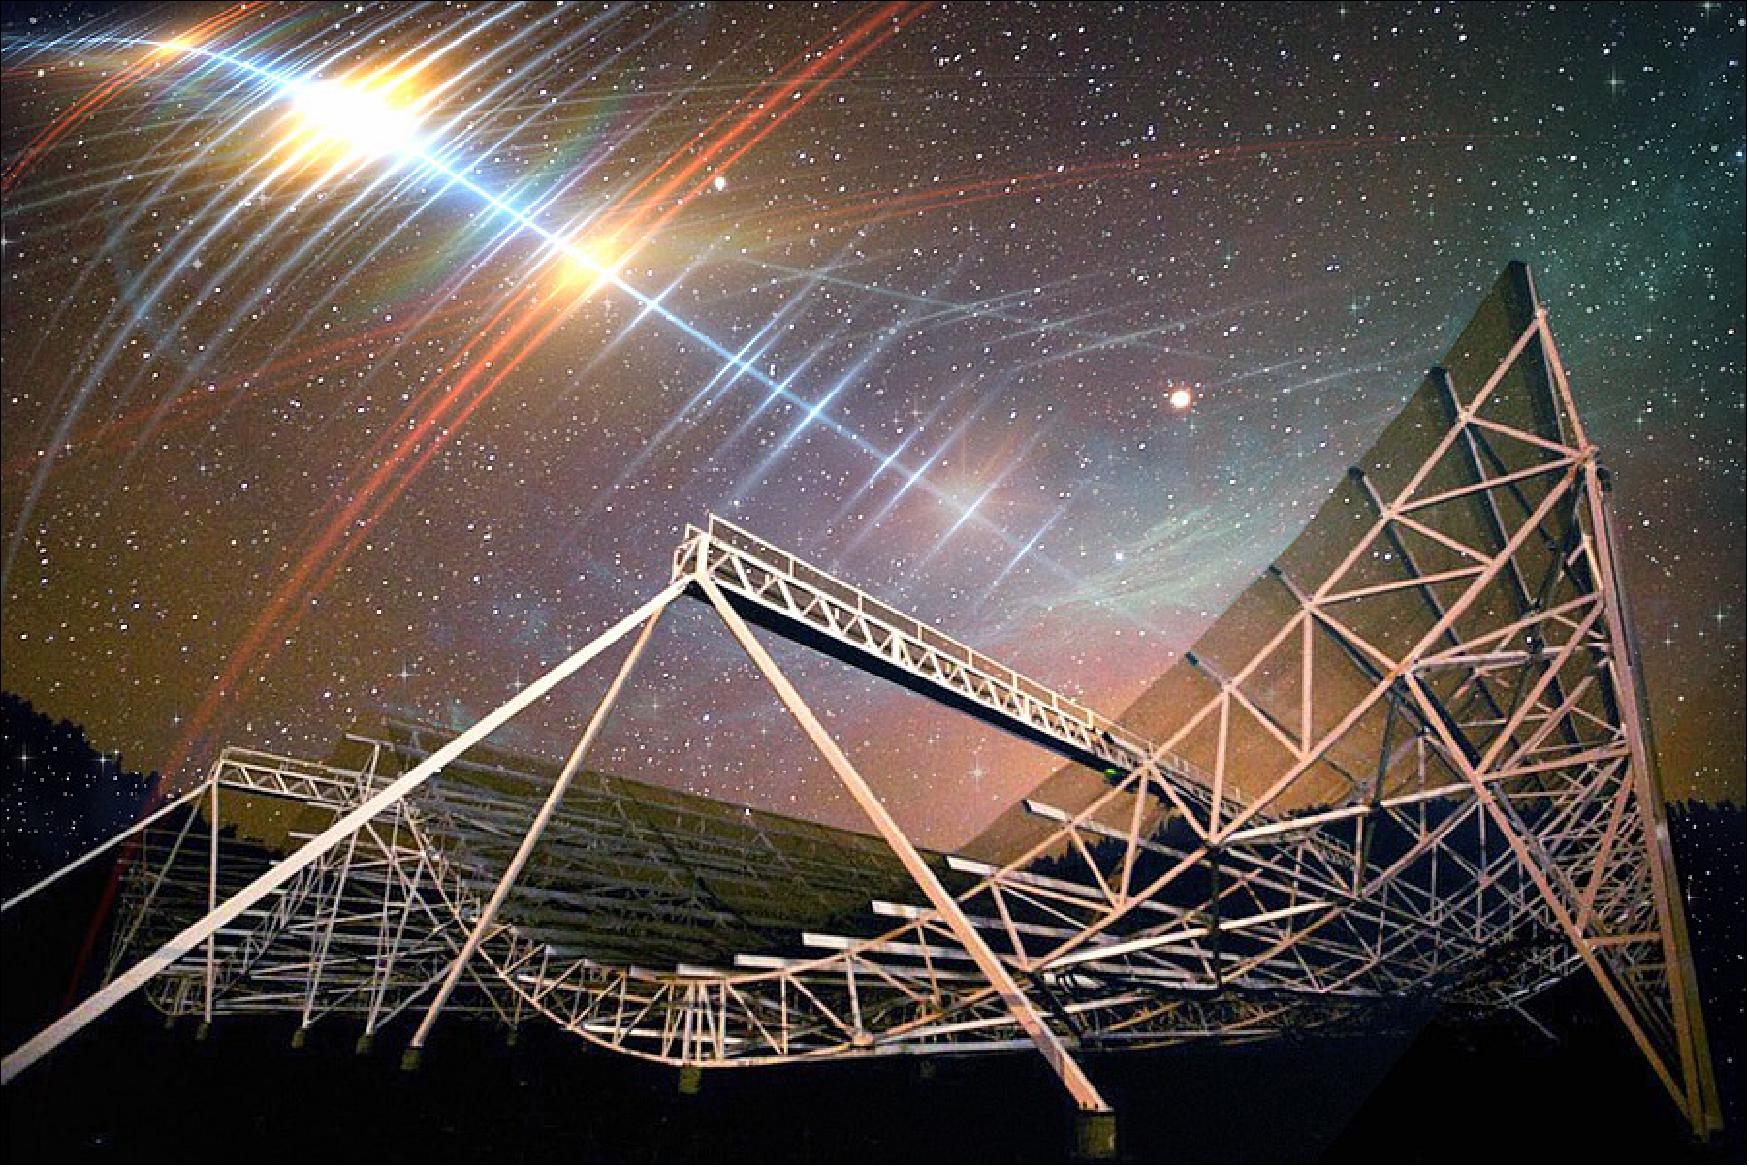 Figure 11: Using the CHIME large radio telescope, astronomers detected a persistent radio signal from a far-off galaxy that appears to flash with surprising regularity (image credits: Photo courtesy of CHIME, with background edited by MIT News)